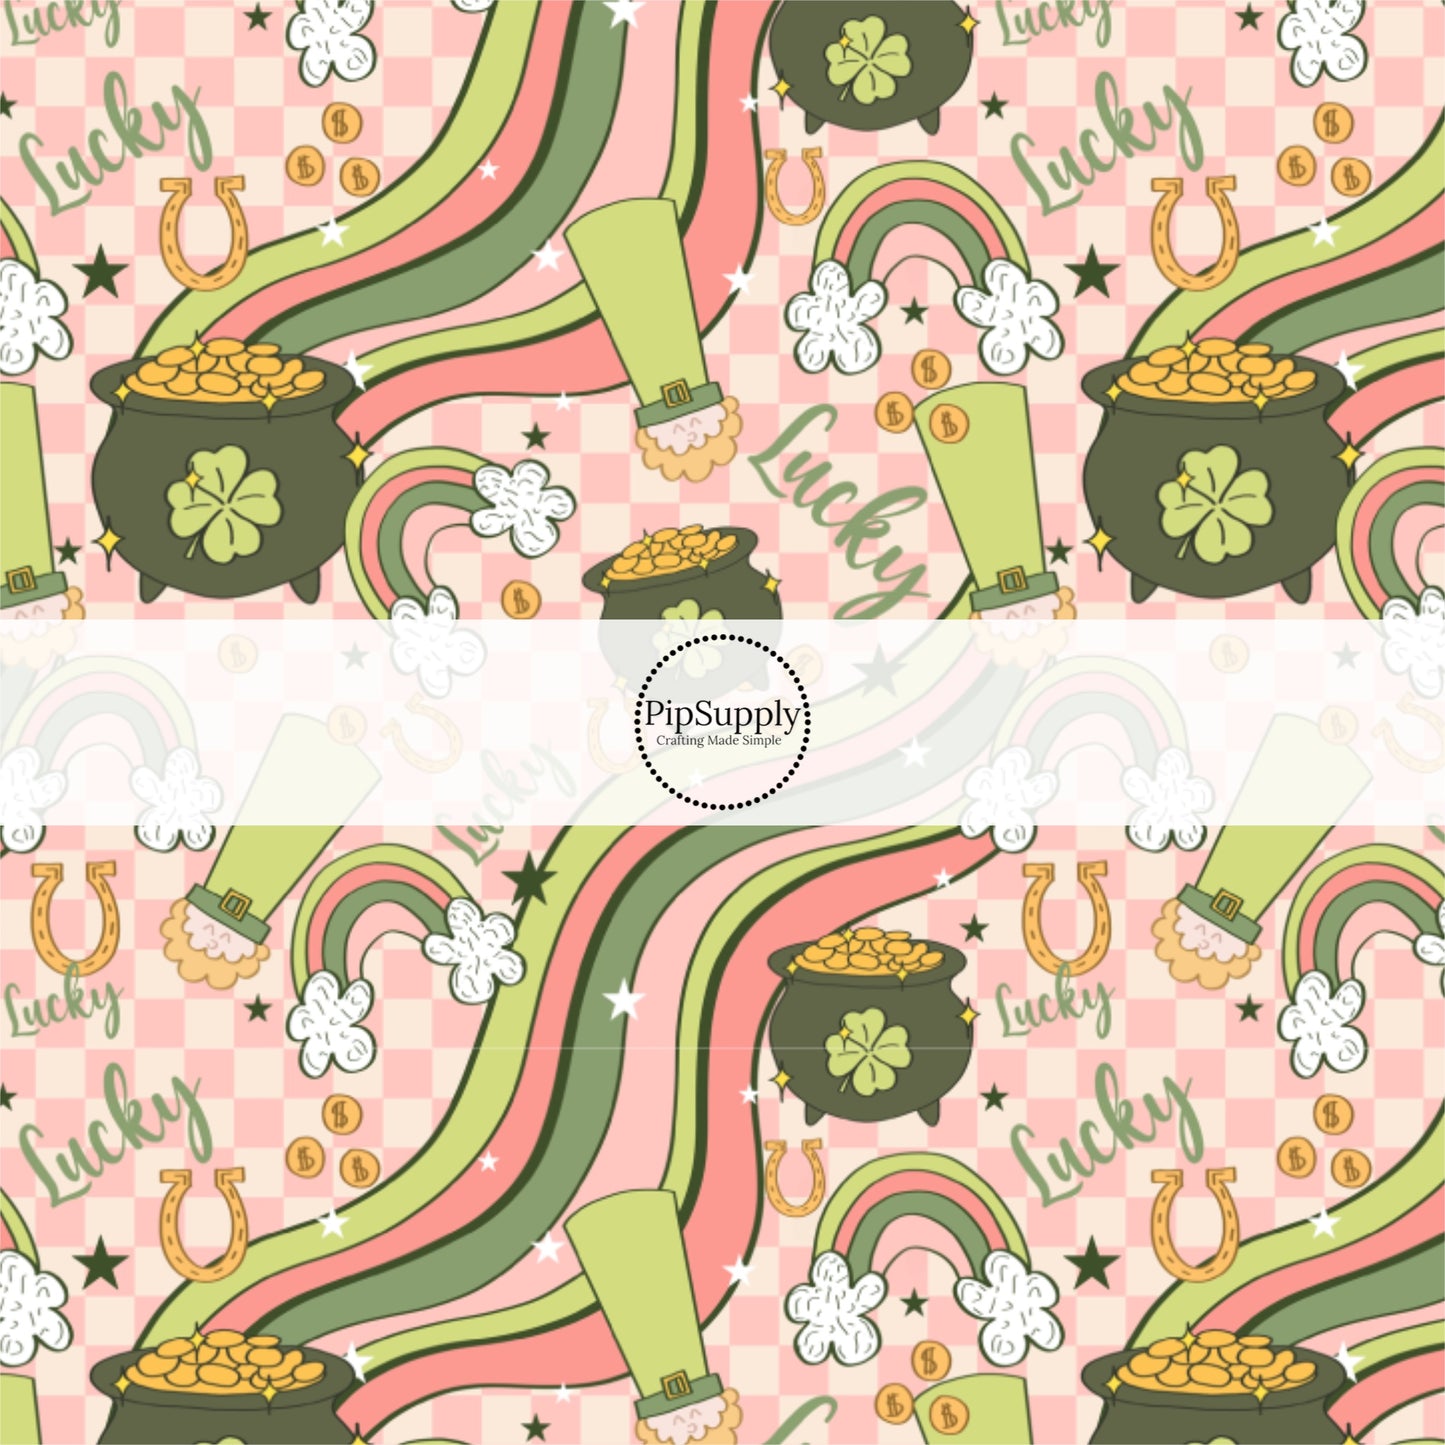 These patterned headband kits are easy to assemble and come with everything you need to make your own knotted headband. These St. Patrick's Day kits include a custom printed and sewn fabric strip and a coordinating velvet headband. This cute pattern features lucky leprechauns, rainbows, and pots of gold on pink and cream checkered pattern. 